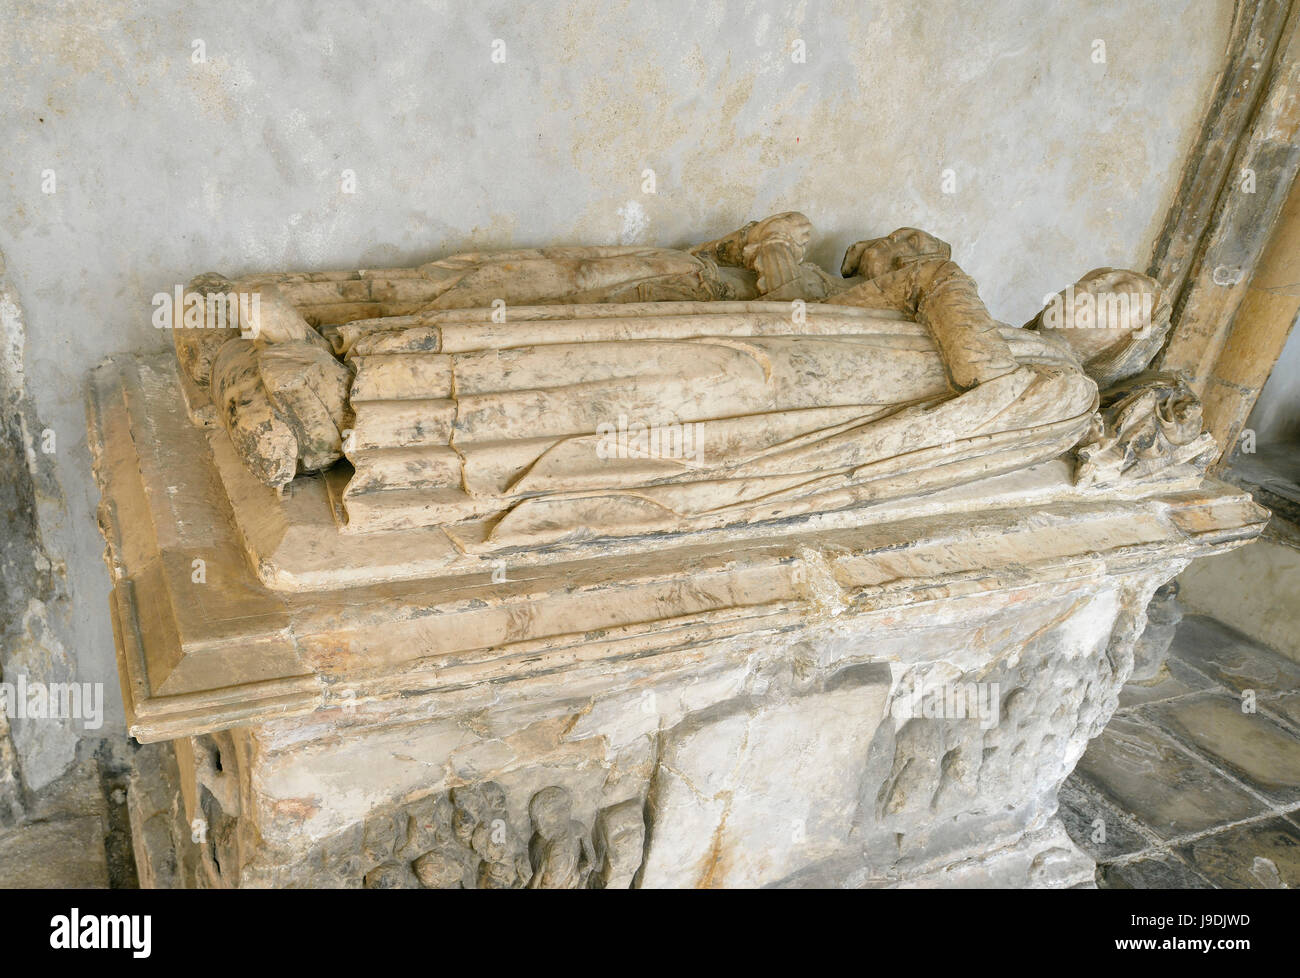 Alabaster Tomb thought to be of Thomas Rowley & his wife Vaulted Crypt of St John on the Wall, Bristol Stock Photo